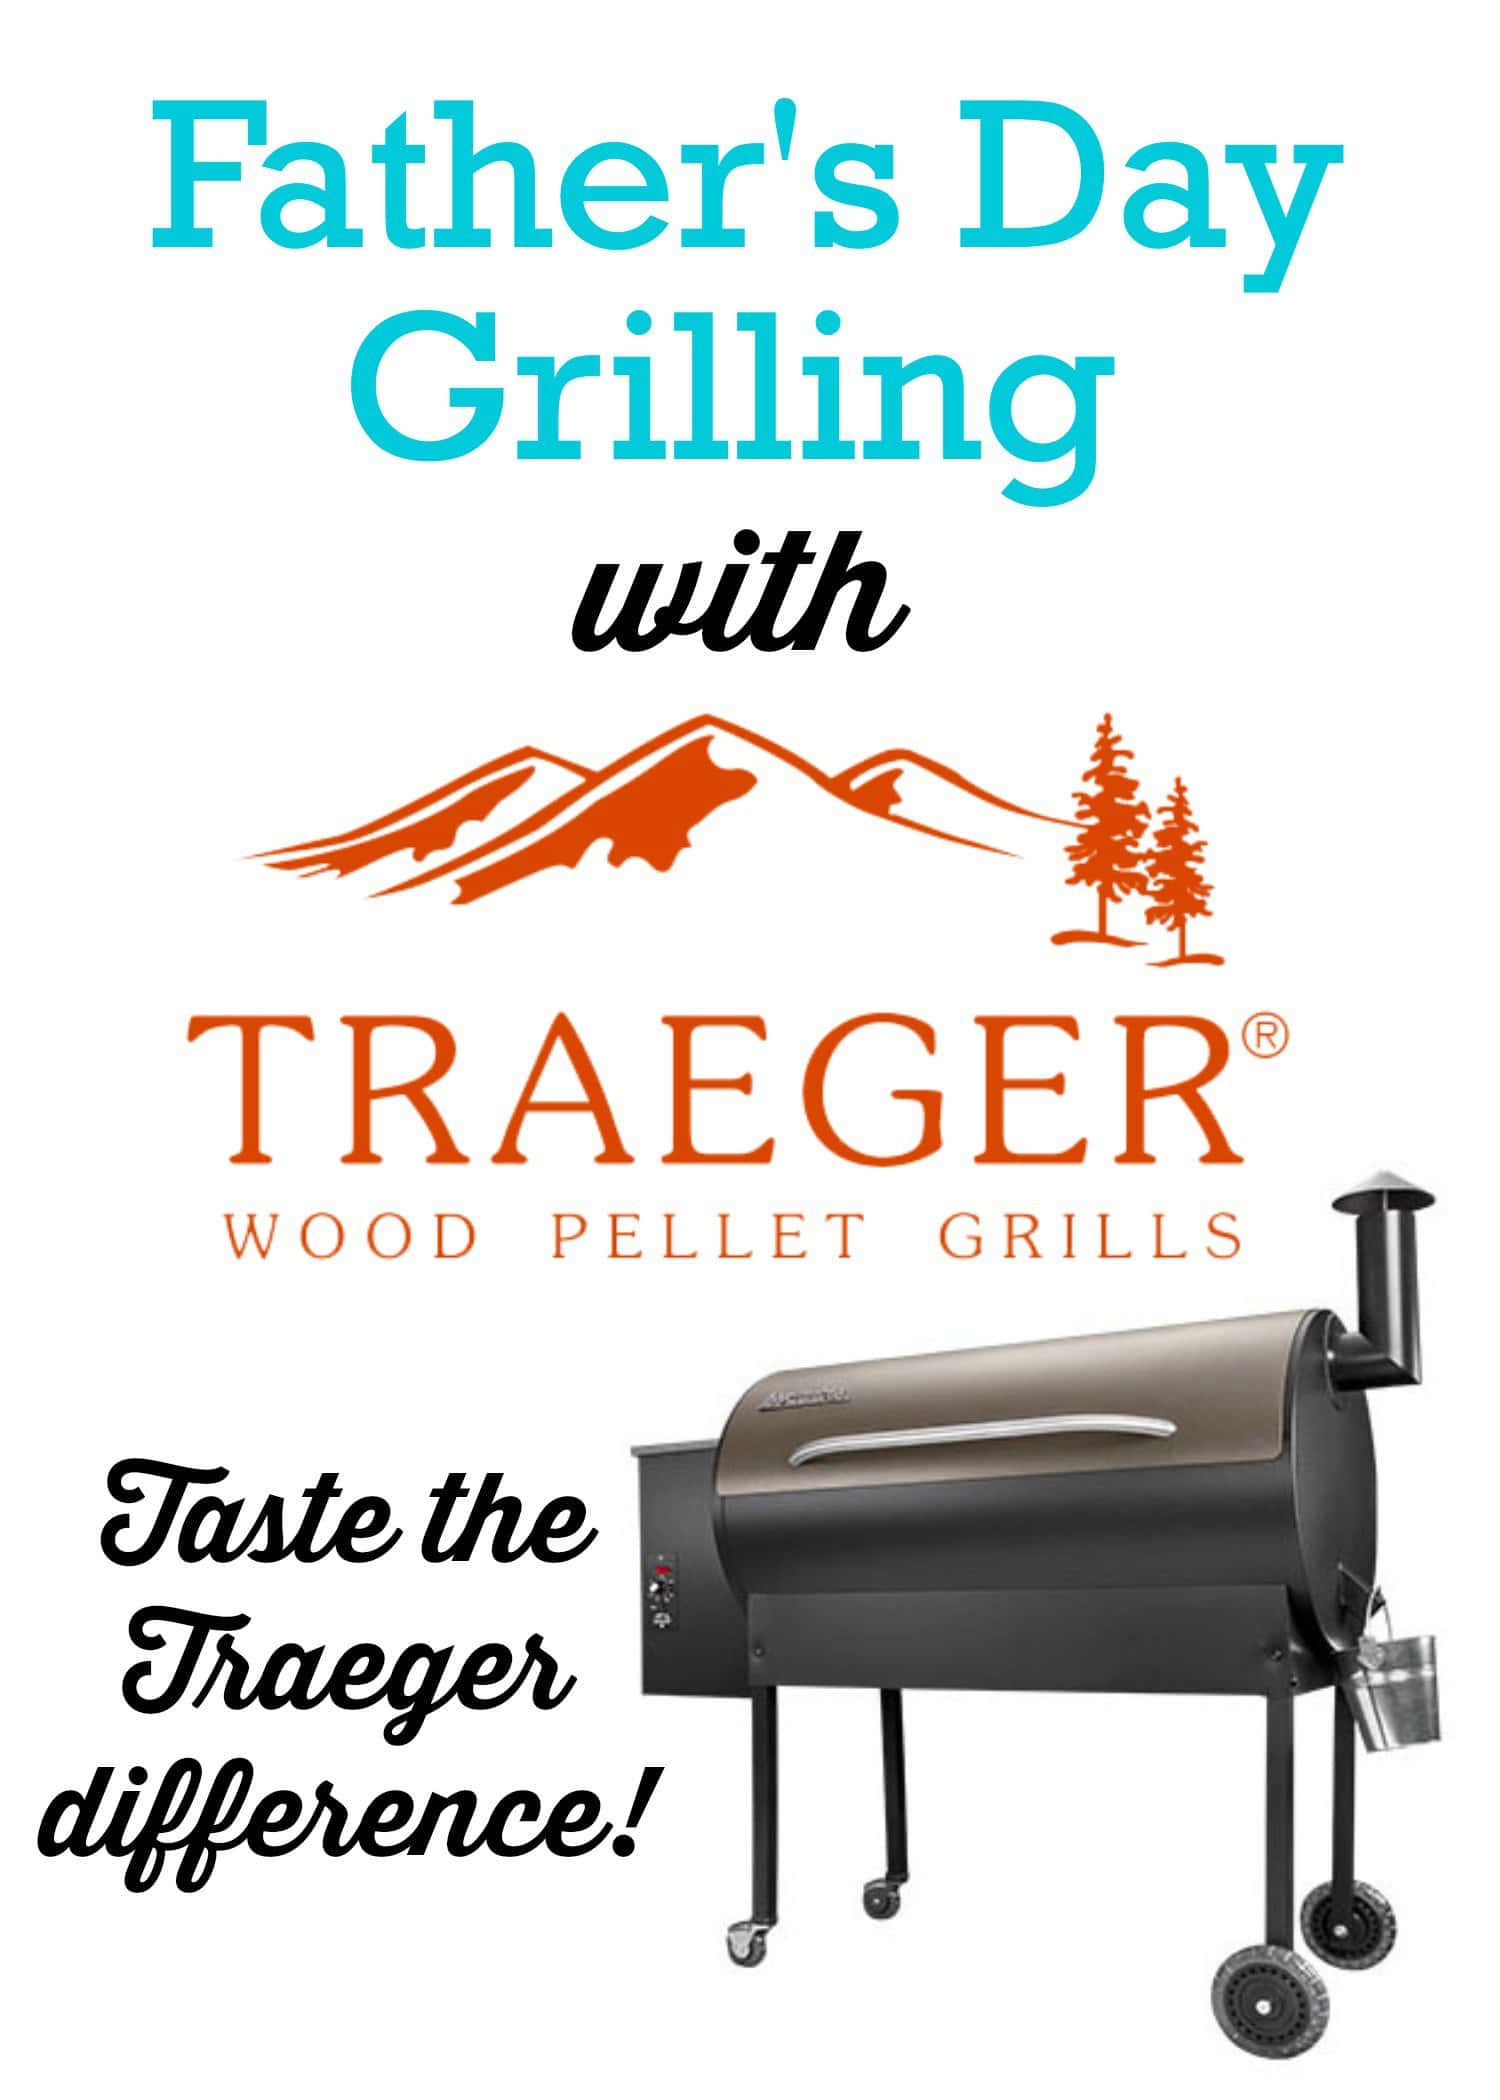 https://www.sixsistersstuff.com/wp-content/uploads/2014/06/Fathers-Day-Grilling.jpg